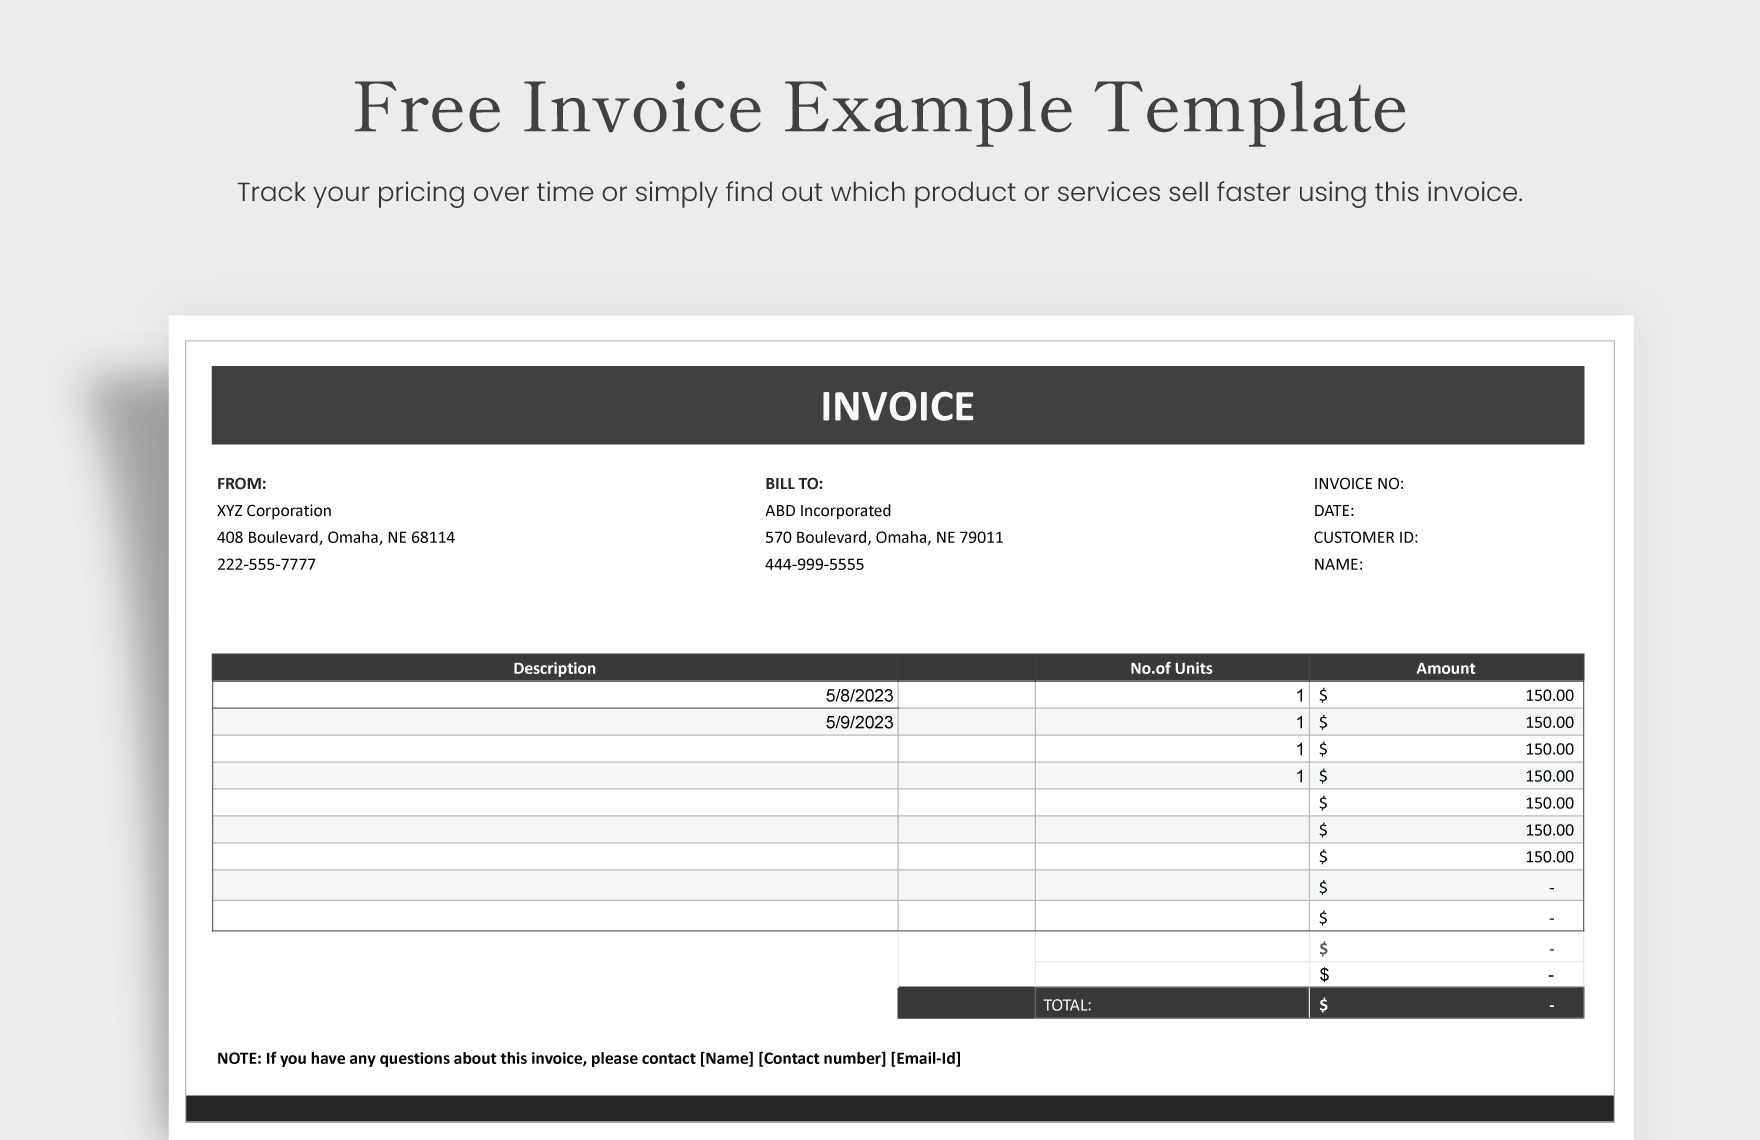 Invoice Example Template in Word, Google Docs, Excel, Google Sheets, Apple Pages, Apple Numbers